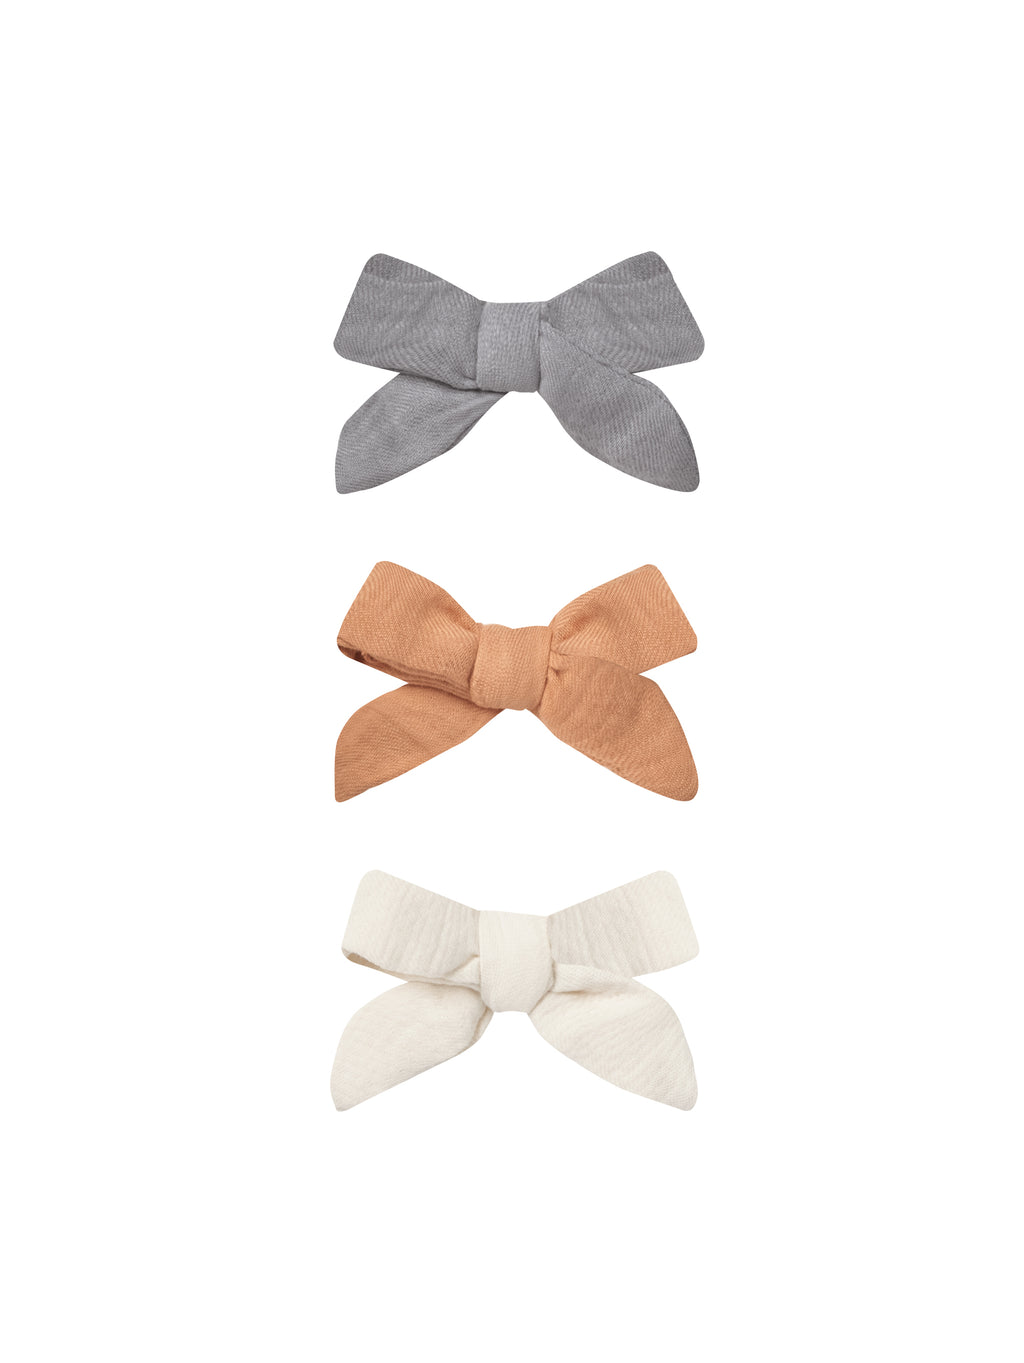 Quincy Mae Bow with Clip, Set of 3 - Lagoon, Melon, Ivory